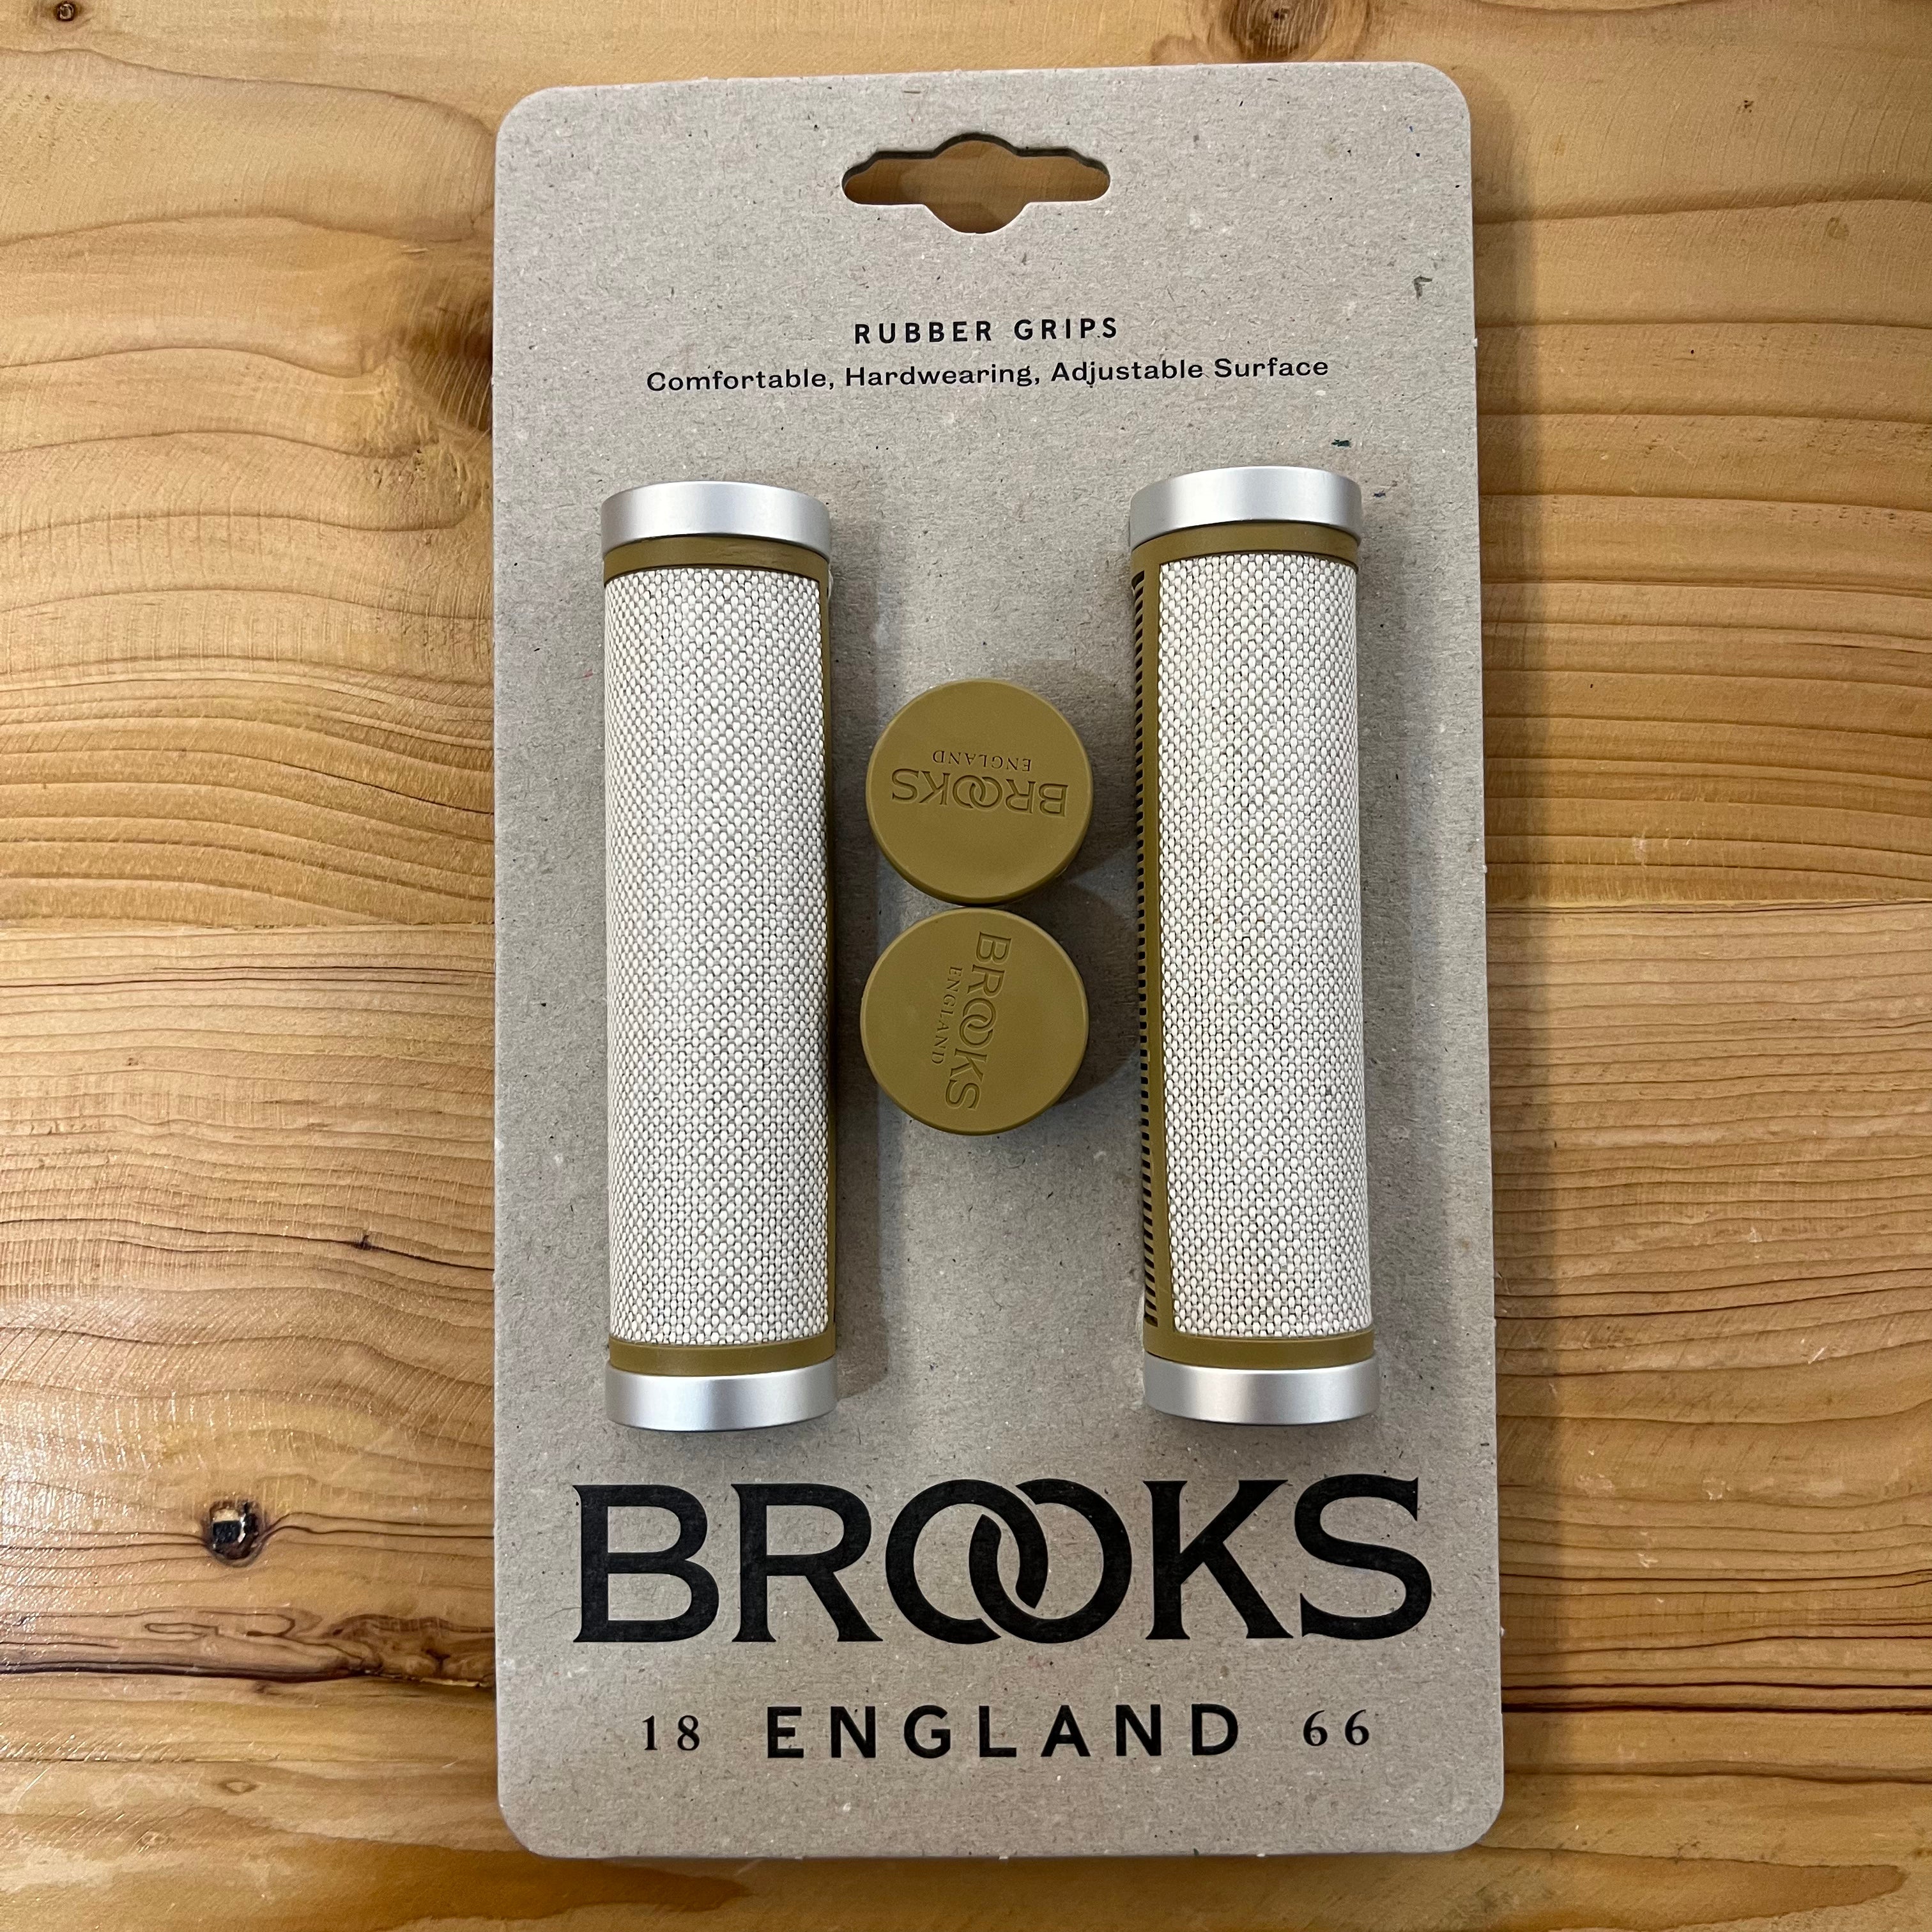 Brooks Cambium Rubber Grips 130/130 (Black/Natural)